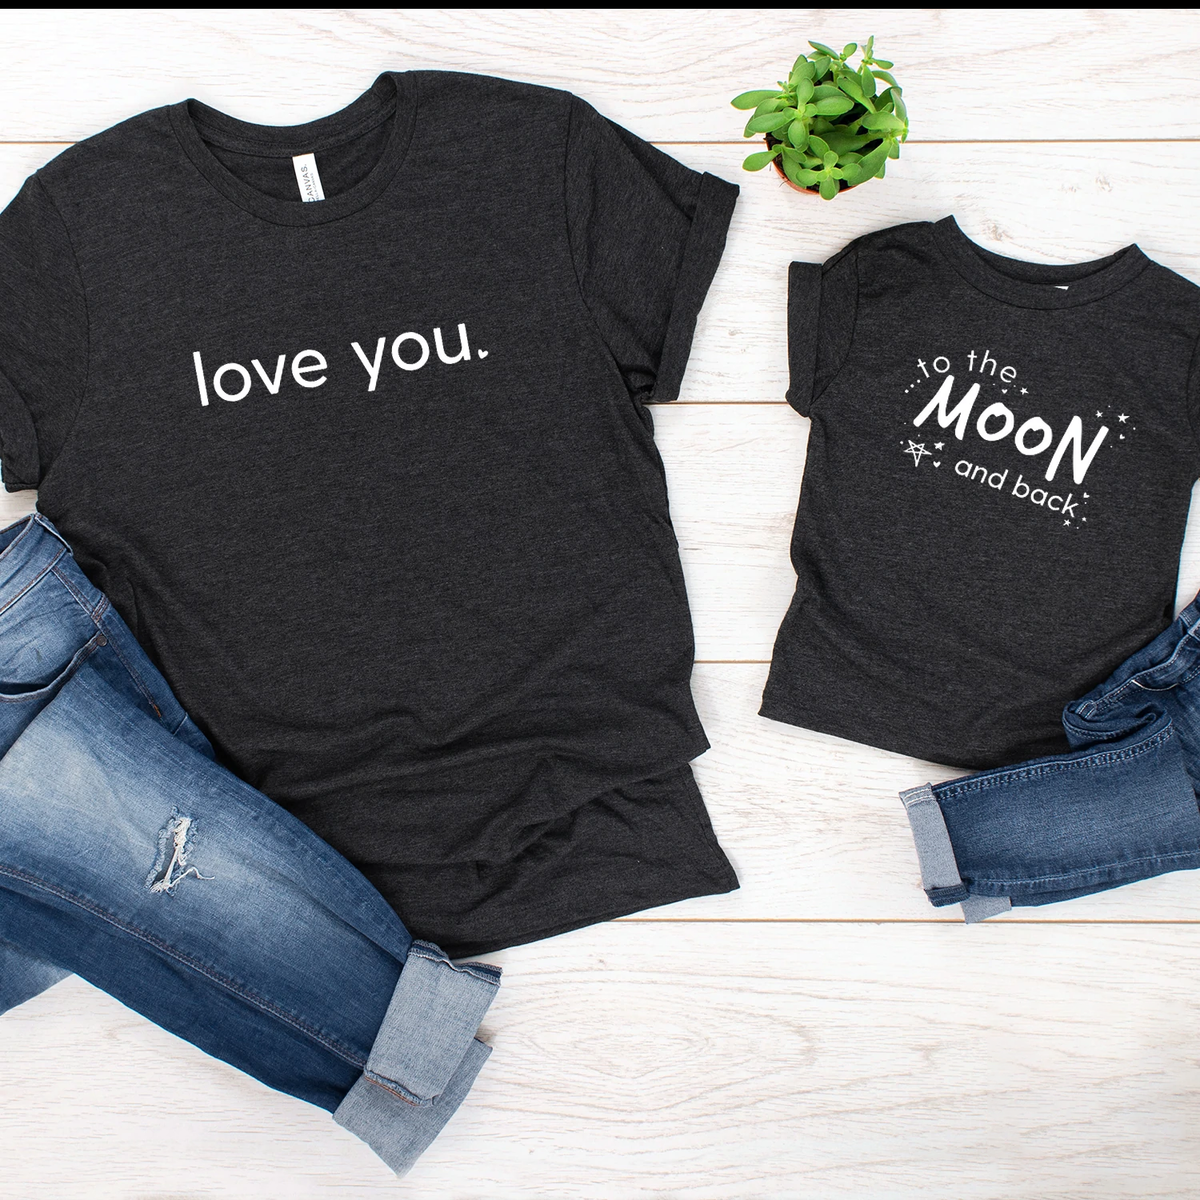 Love You - To the Moon and Back Black Twinning T-Shirts